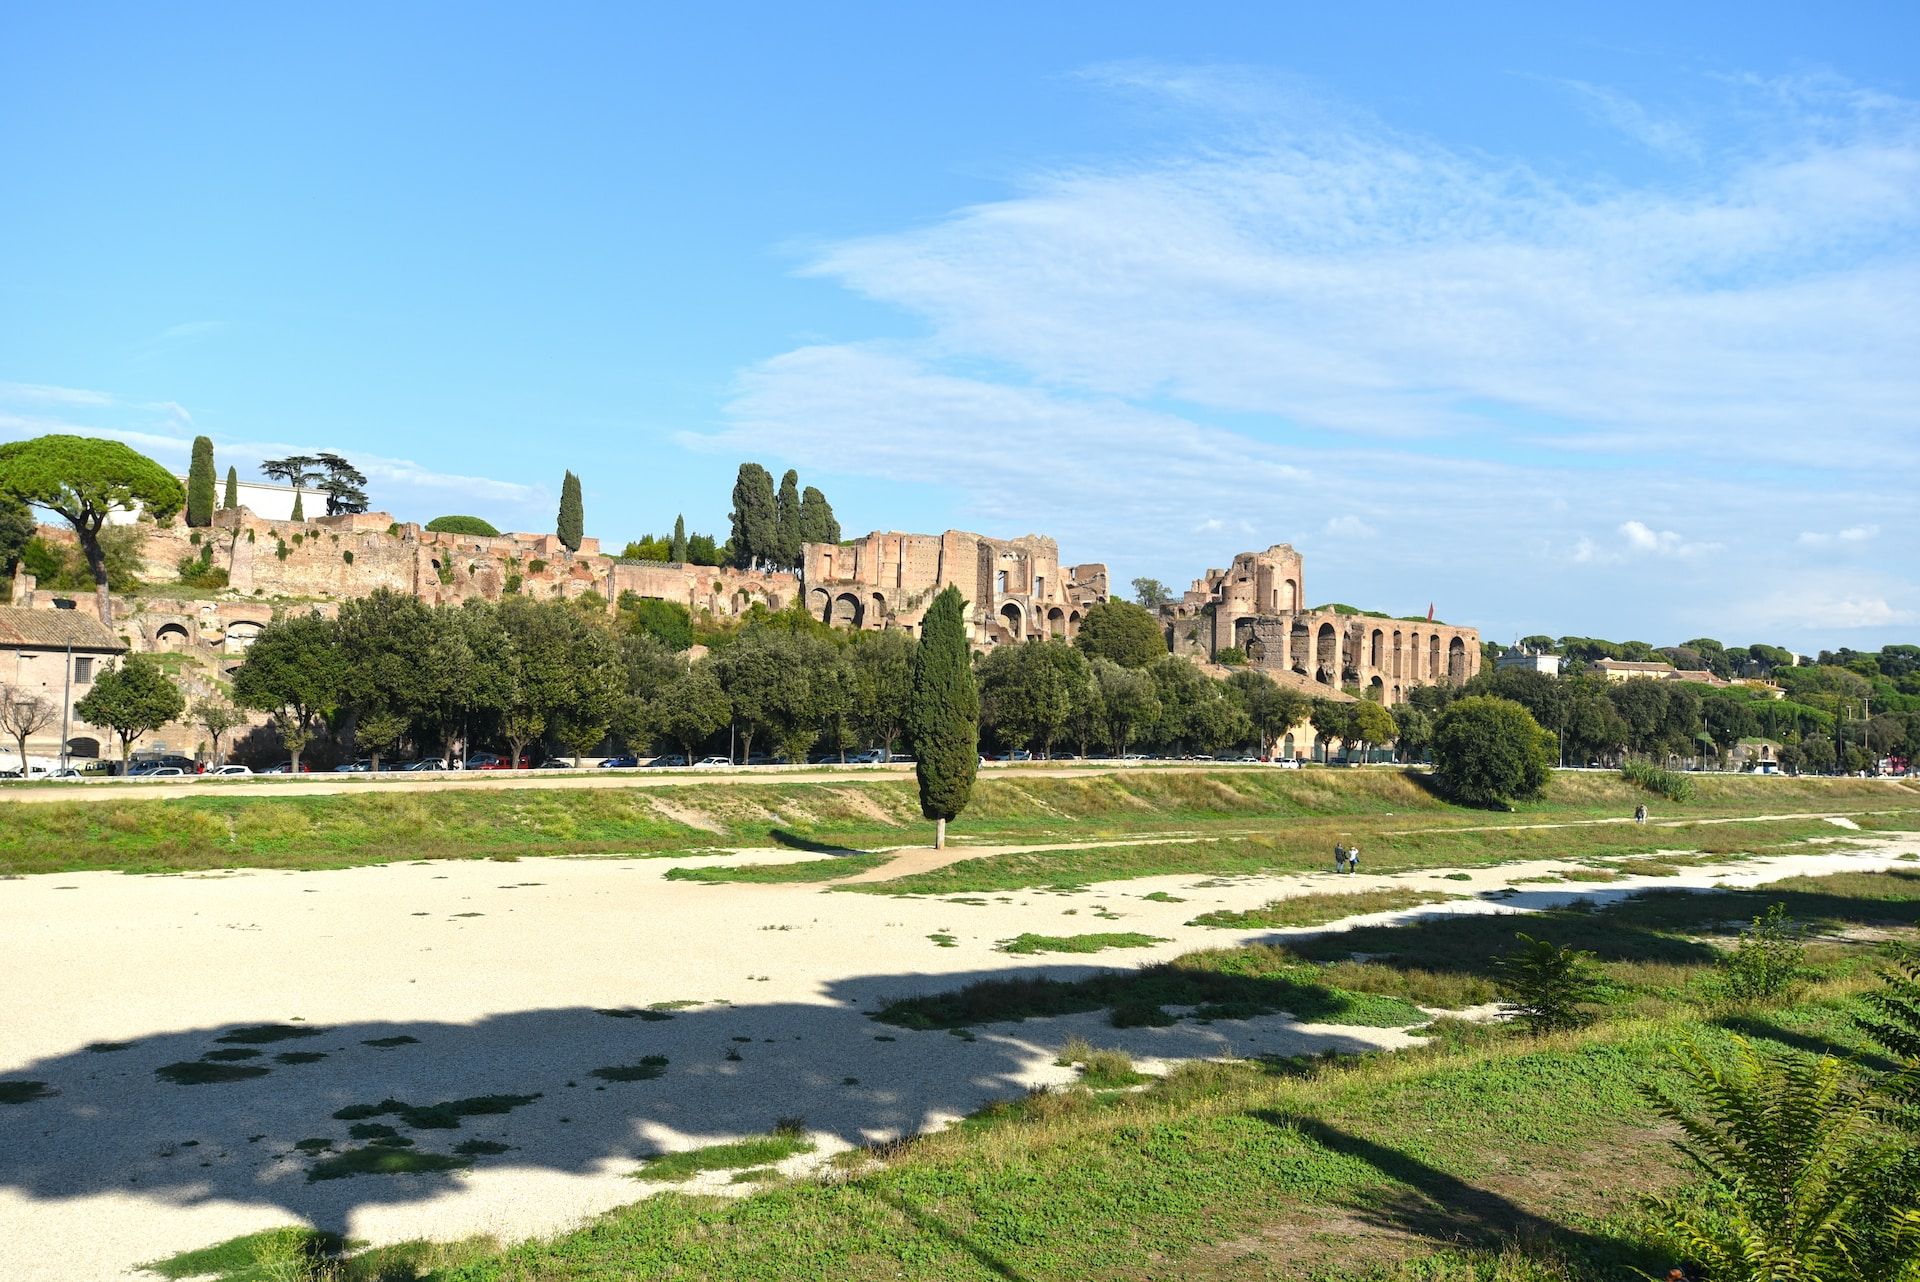 Side view of the Roman Circus Maximus with green trees and a bright blue sky above